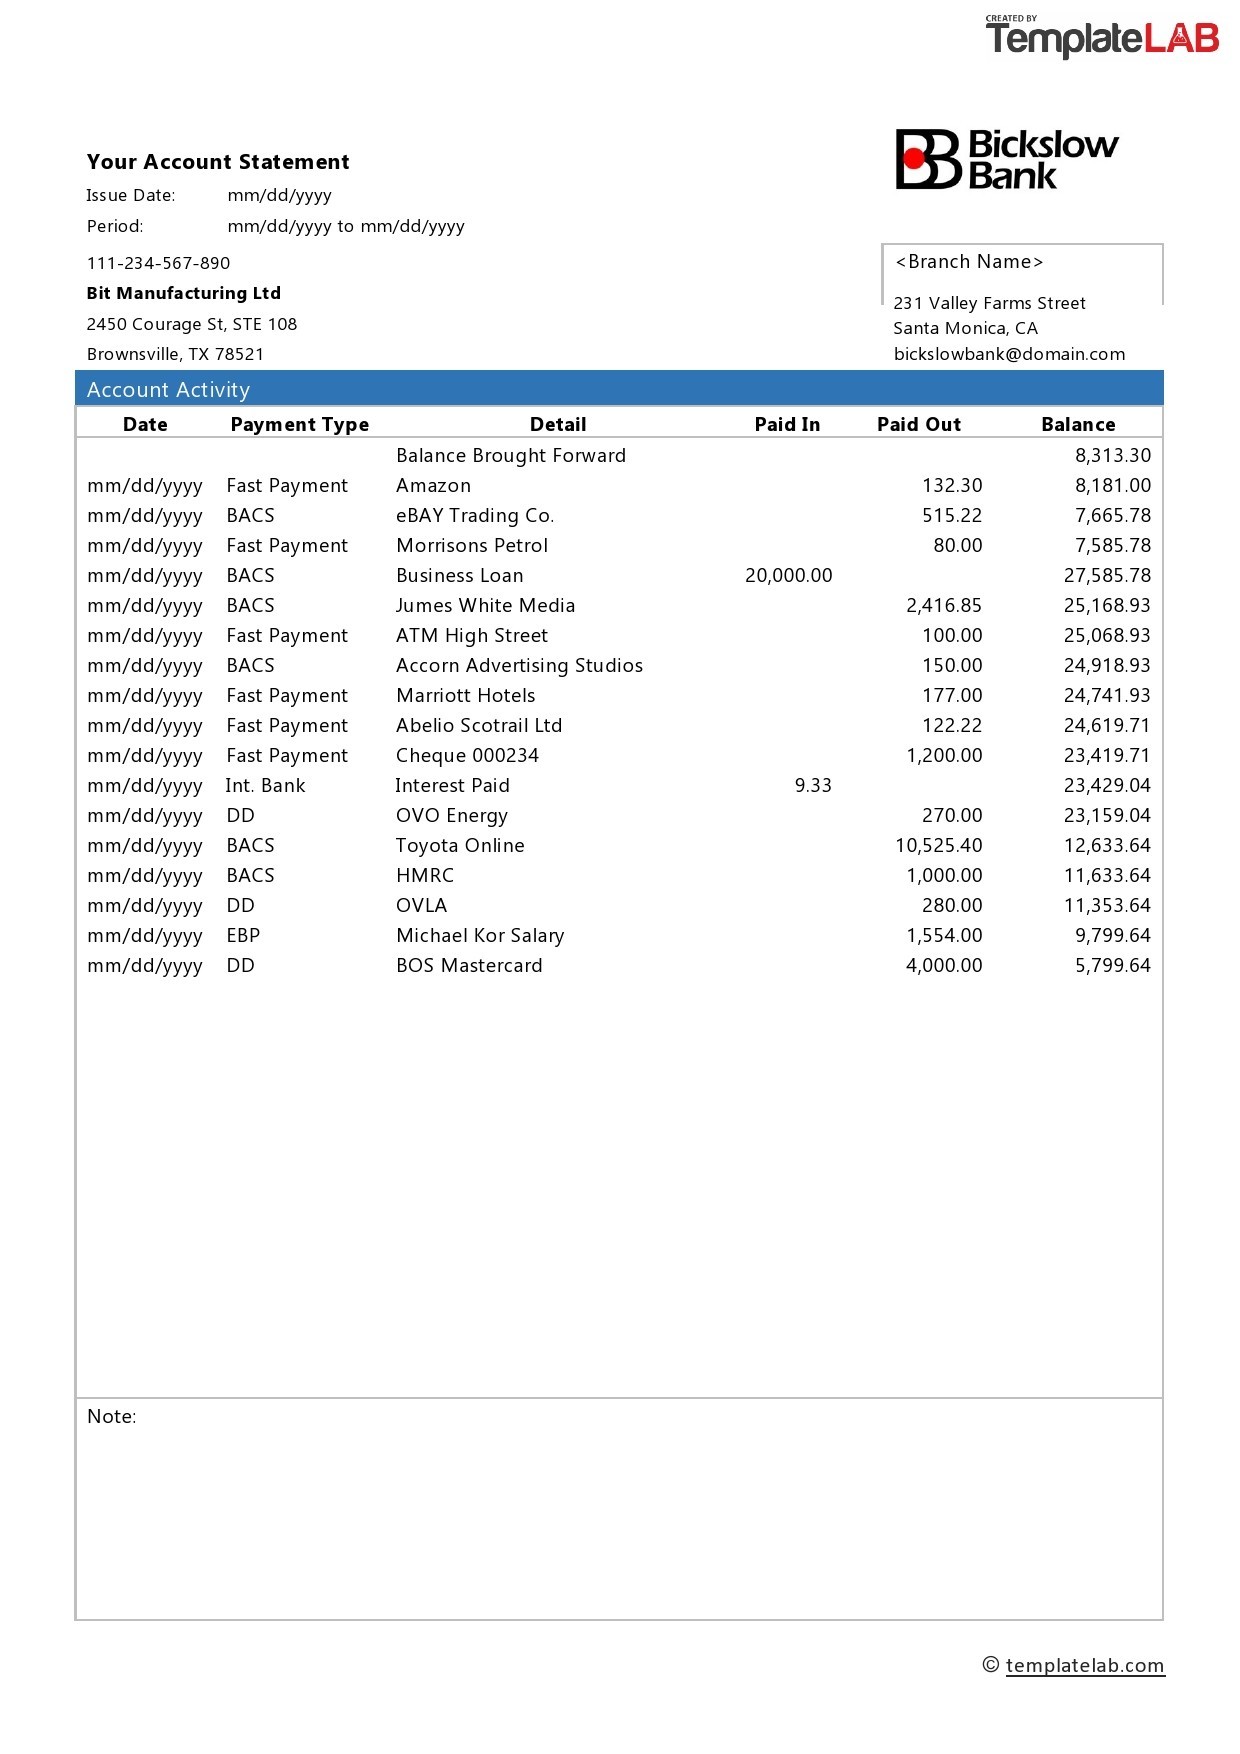 Free Bank Statement Template from templatelab.com